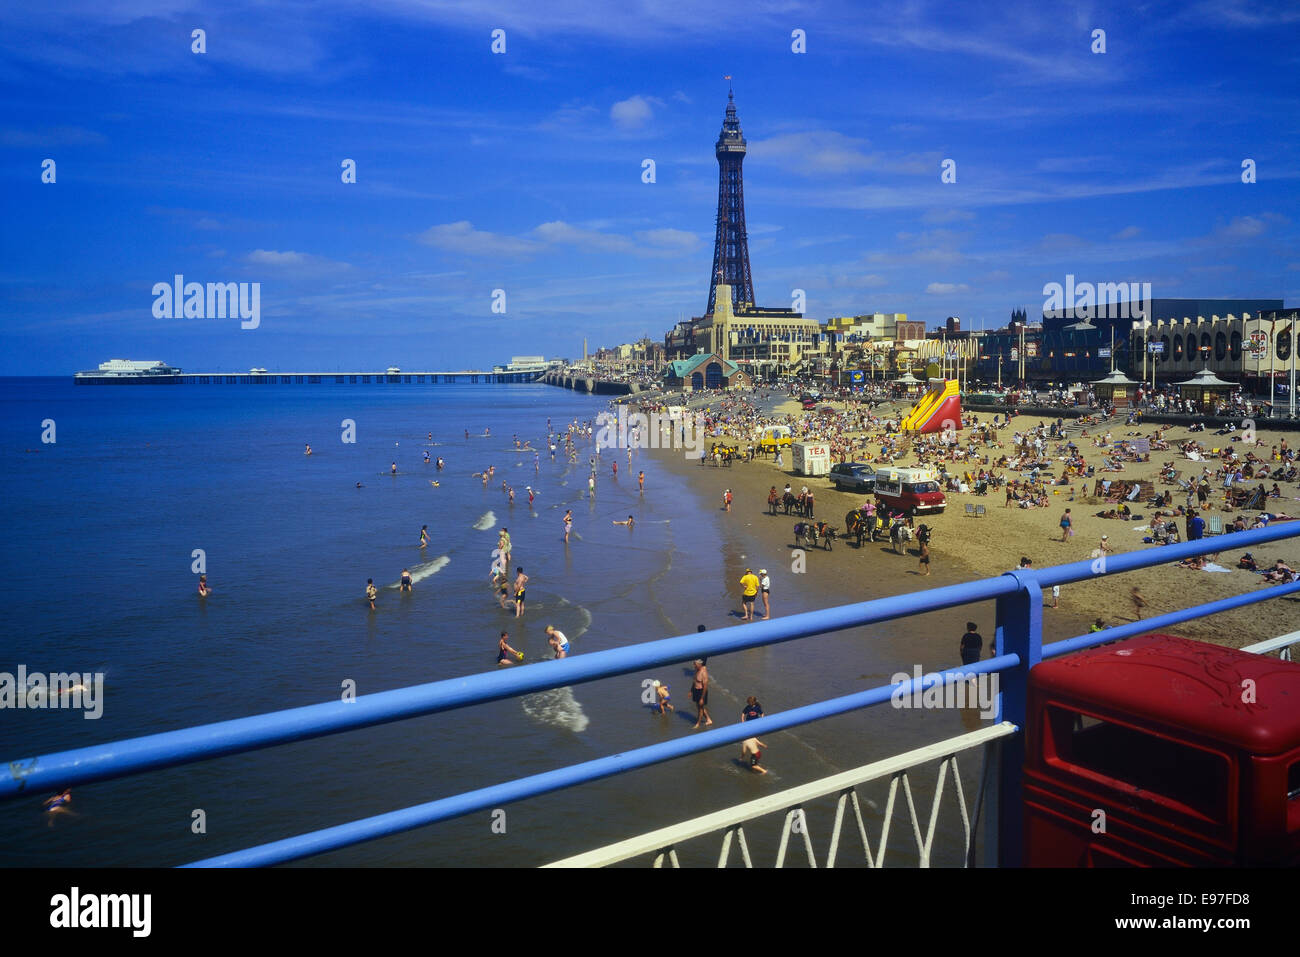 Blackpool seafront, North pier and Tower. Lancashire, England, UK Stock Photo